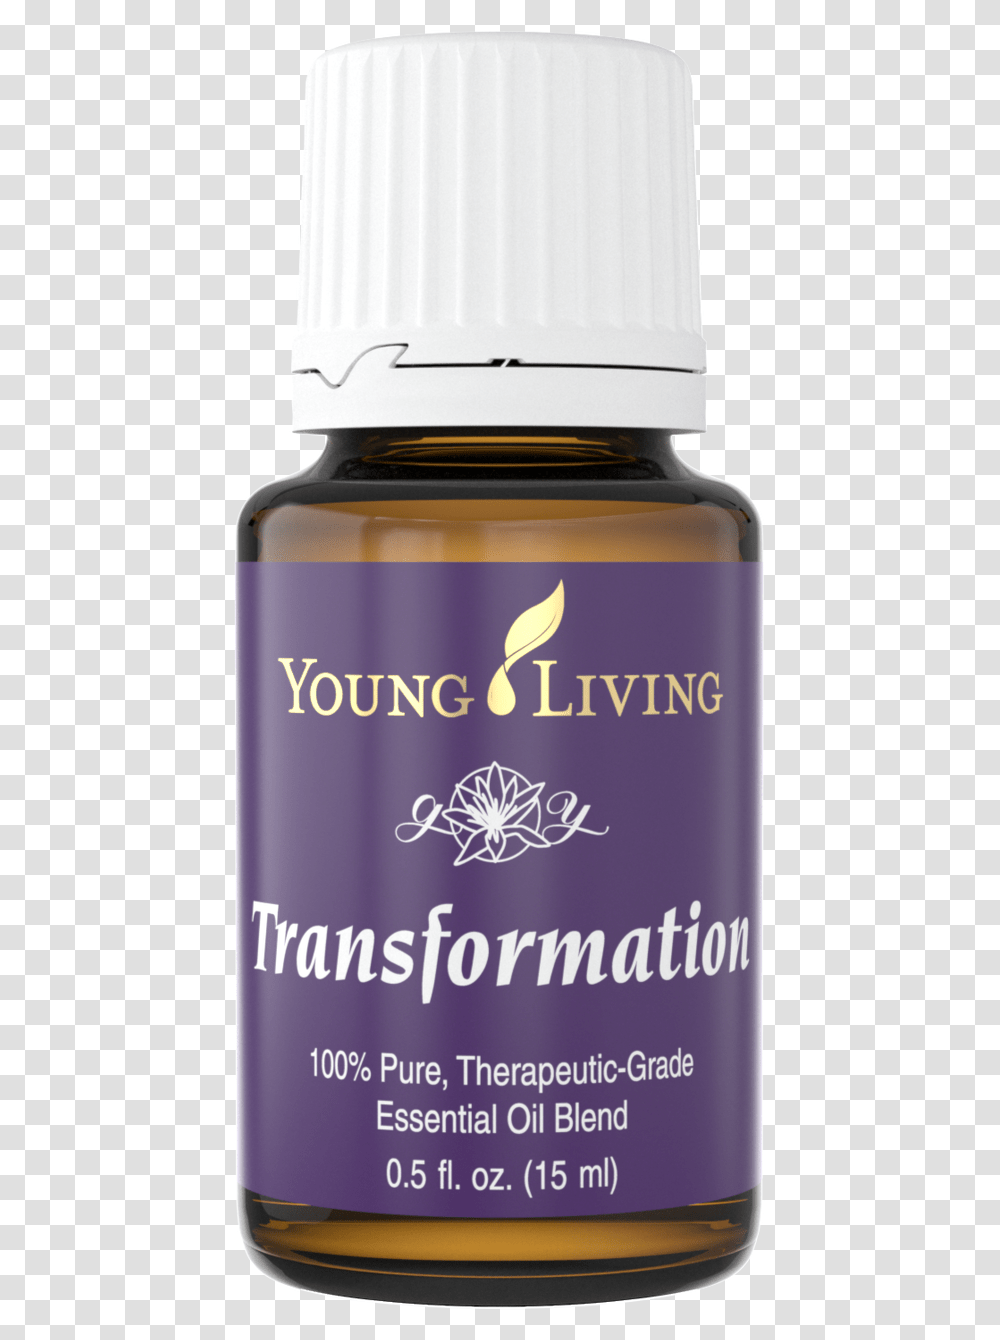 Transformation Essential Oil Blend 15 Ml Bottle Saw Palmetto, Label, Cosmetics, Beer Transparent Png